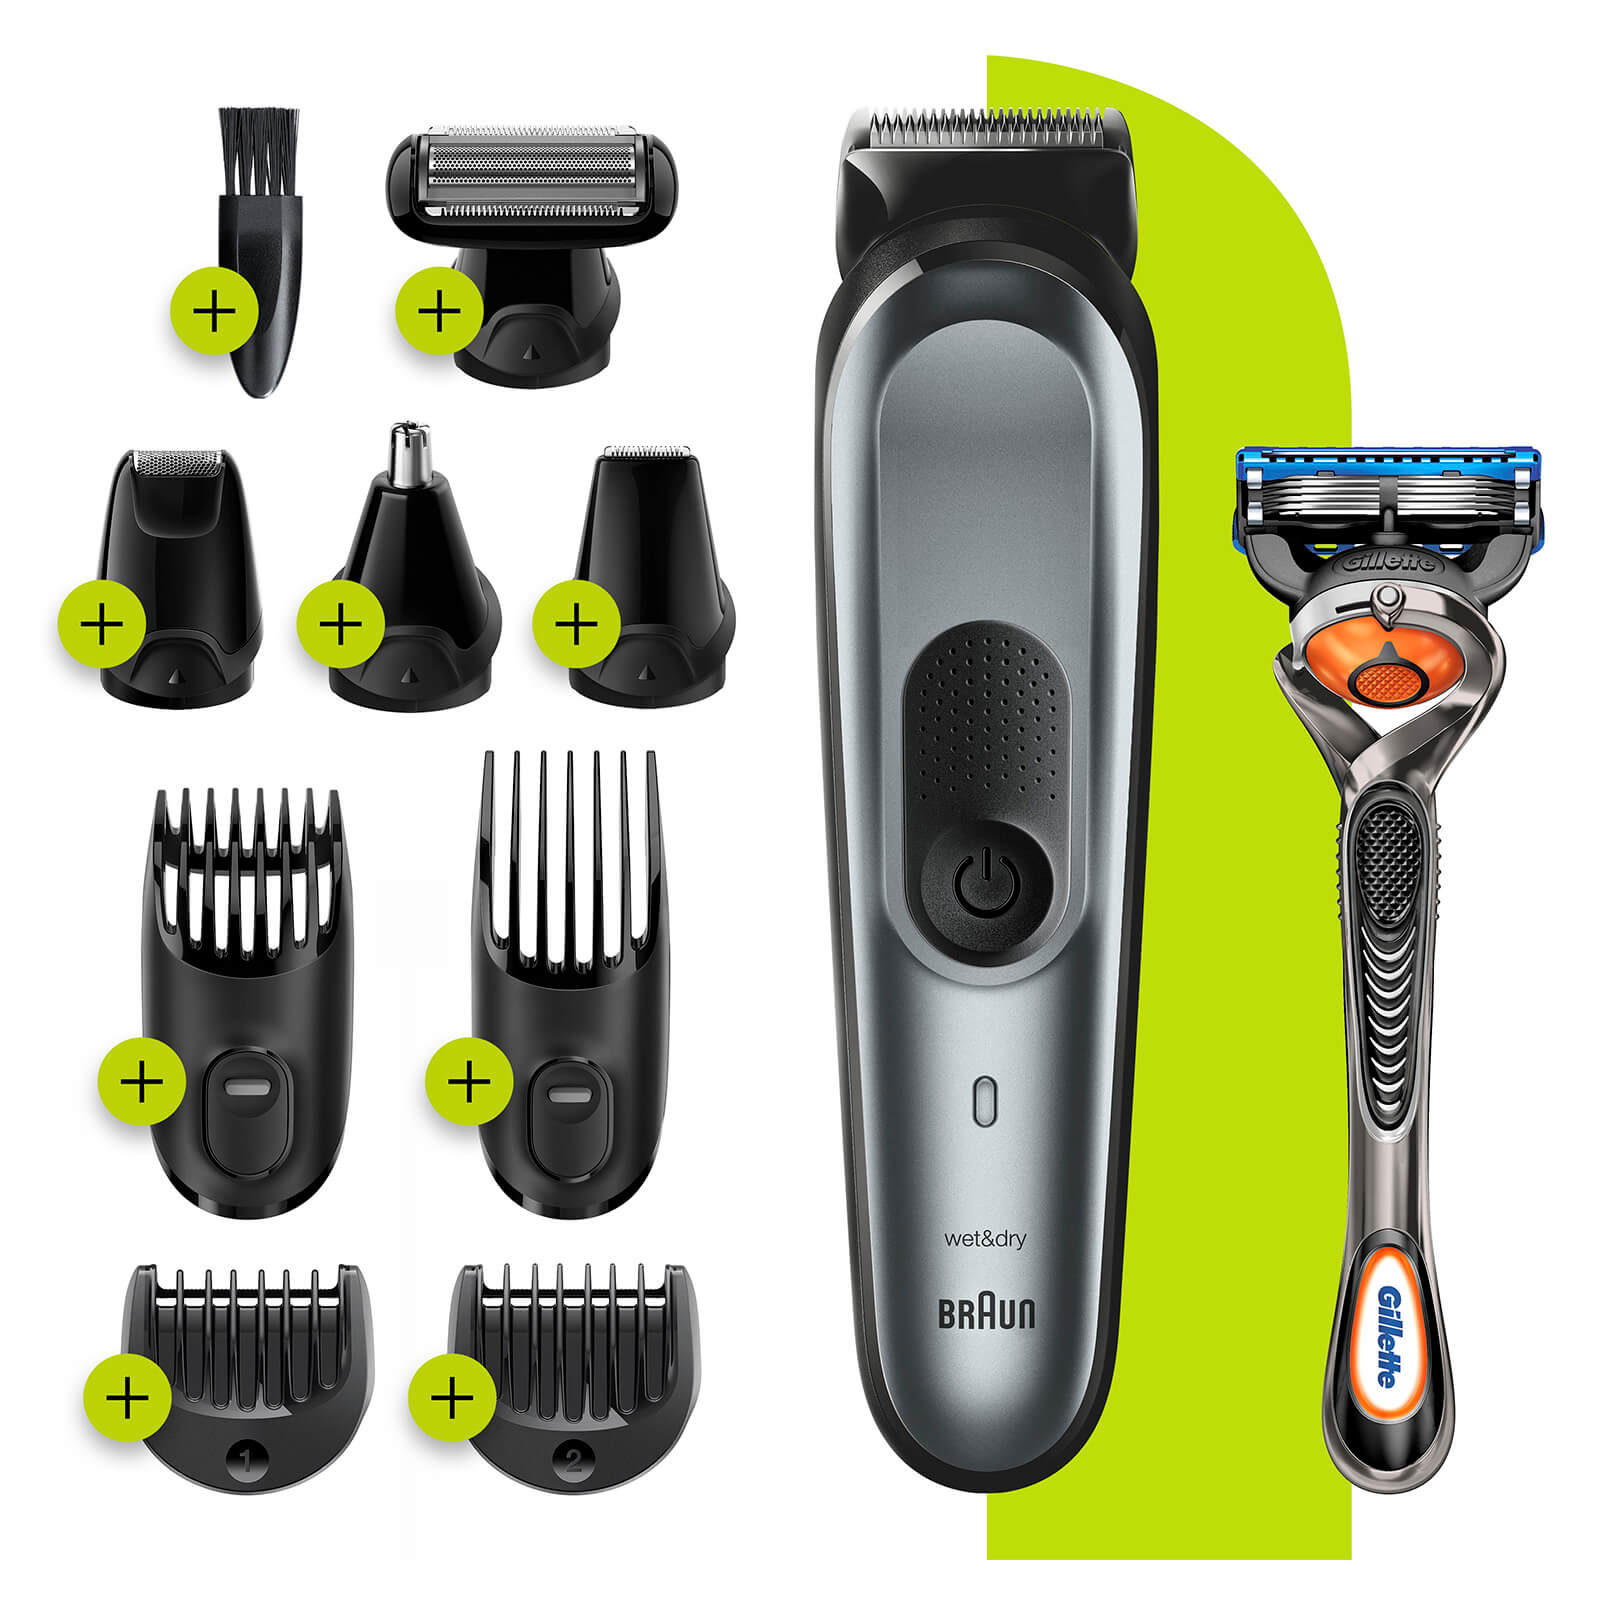 Braun All-in-one Trimmer 7 - 8 attachments